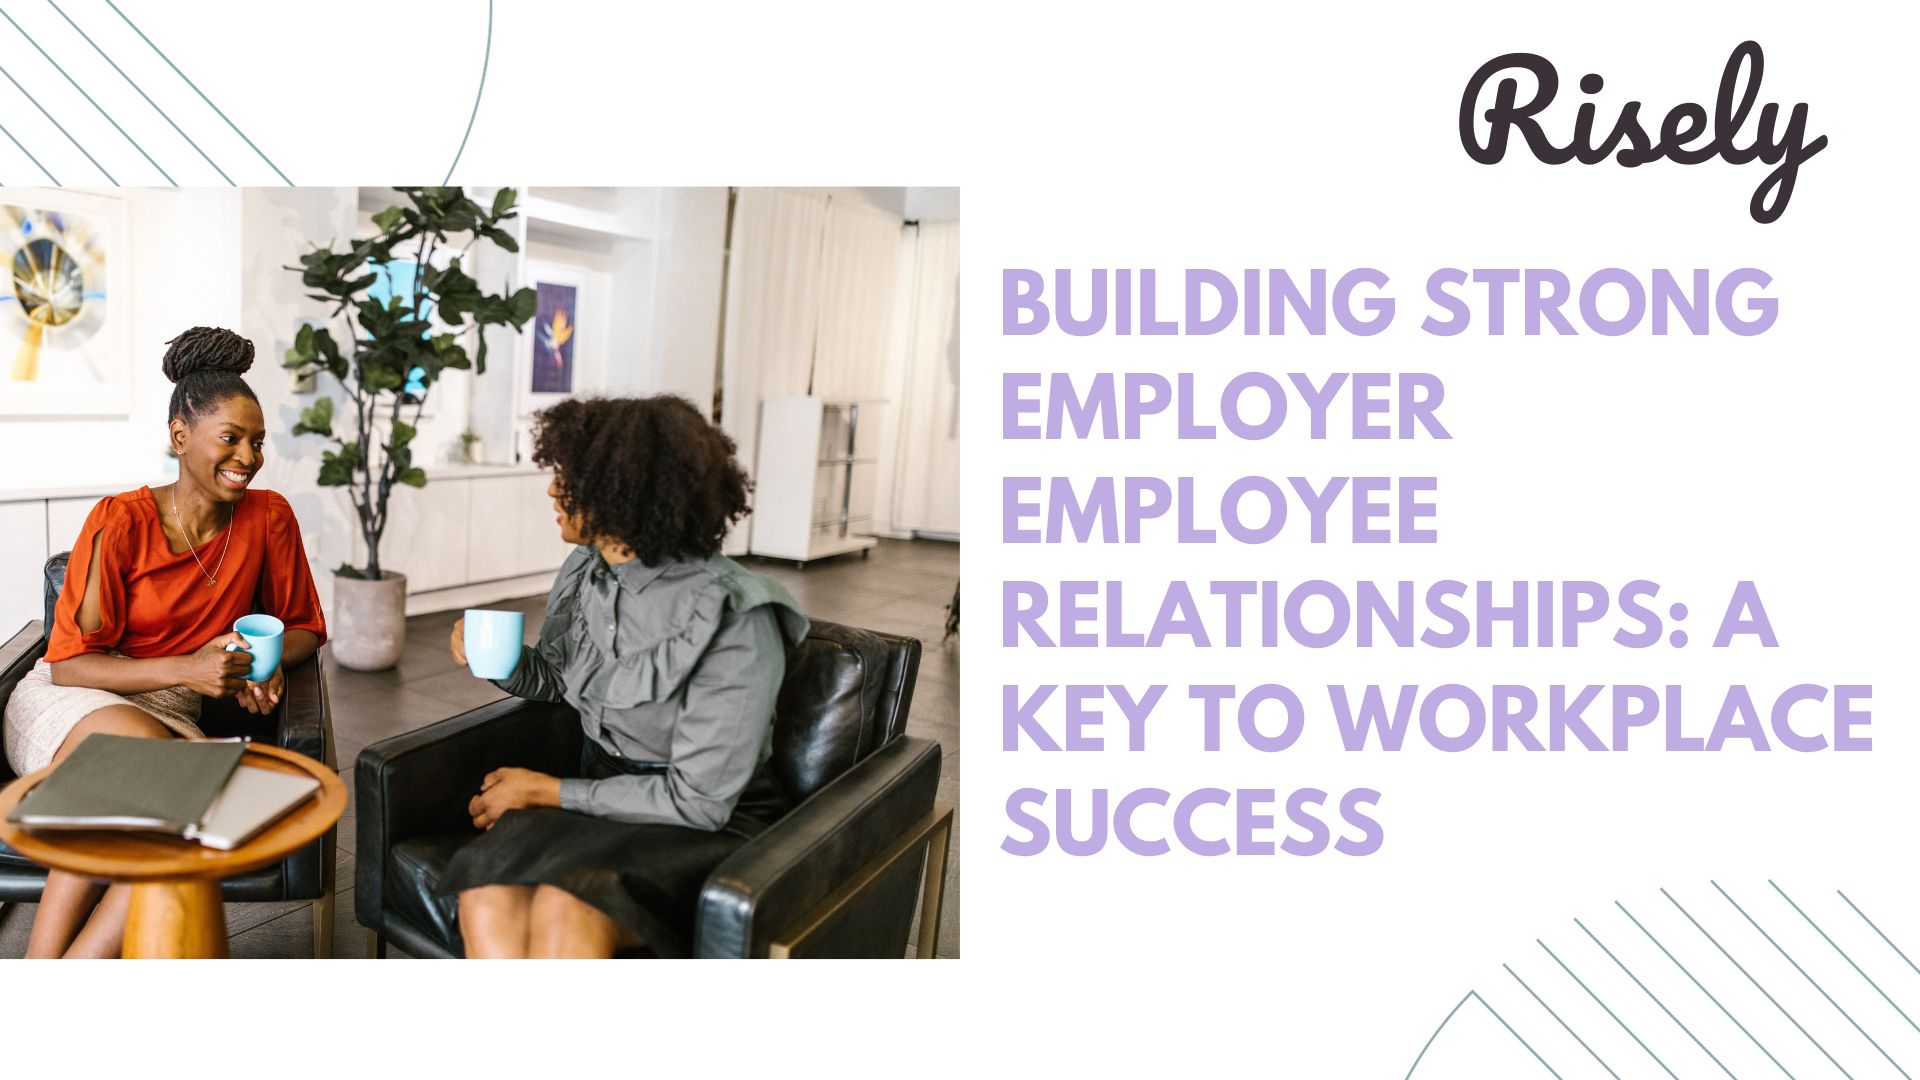 Building Strong Employer Employee Relationships: A Key to Workplace Success